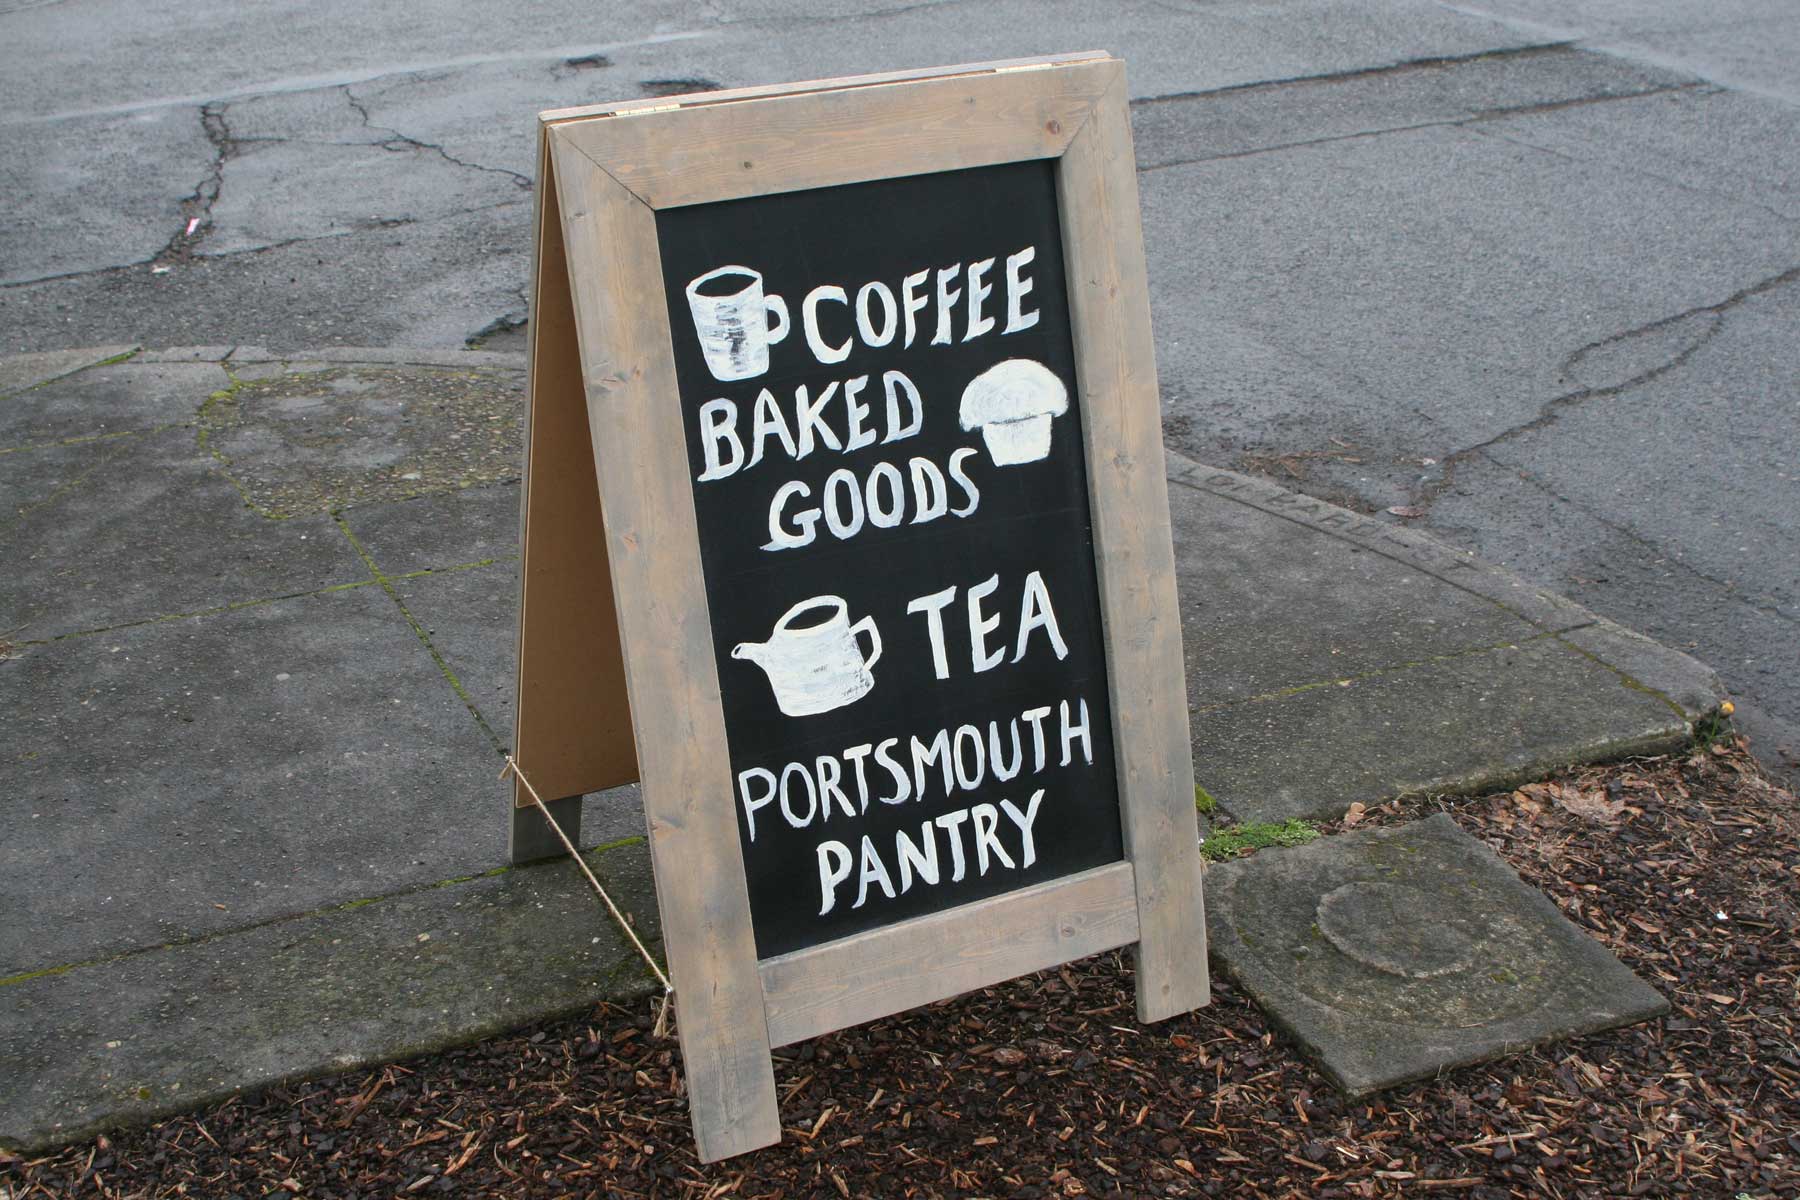 Portsmouth Pantry in North Portland